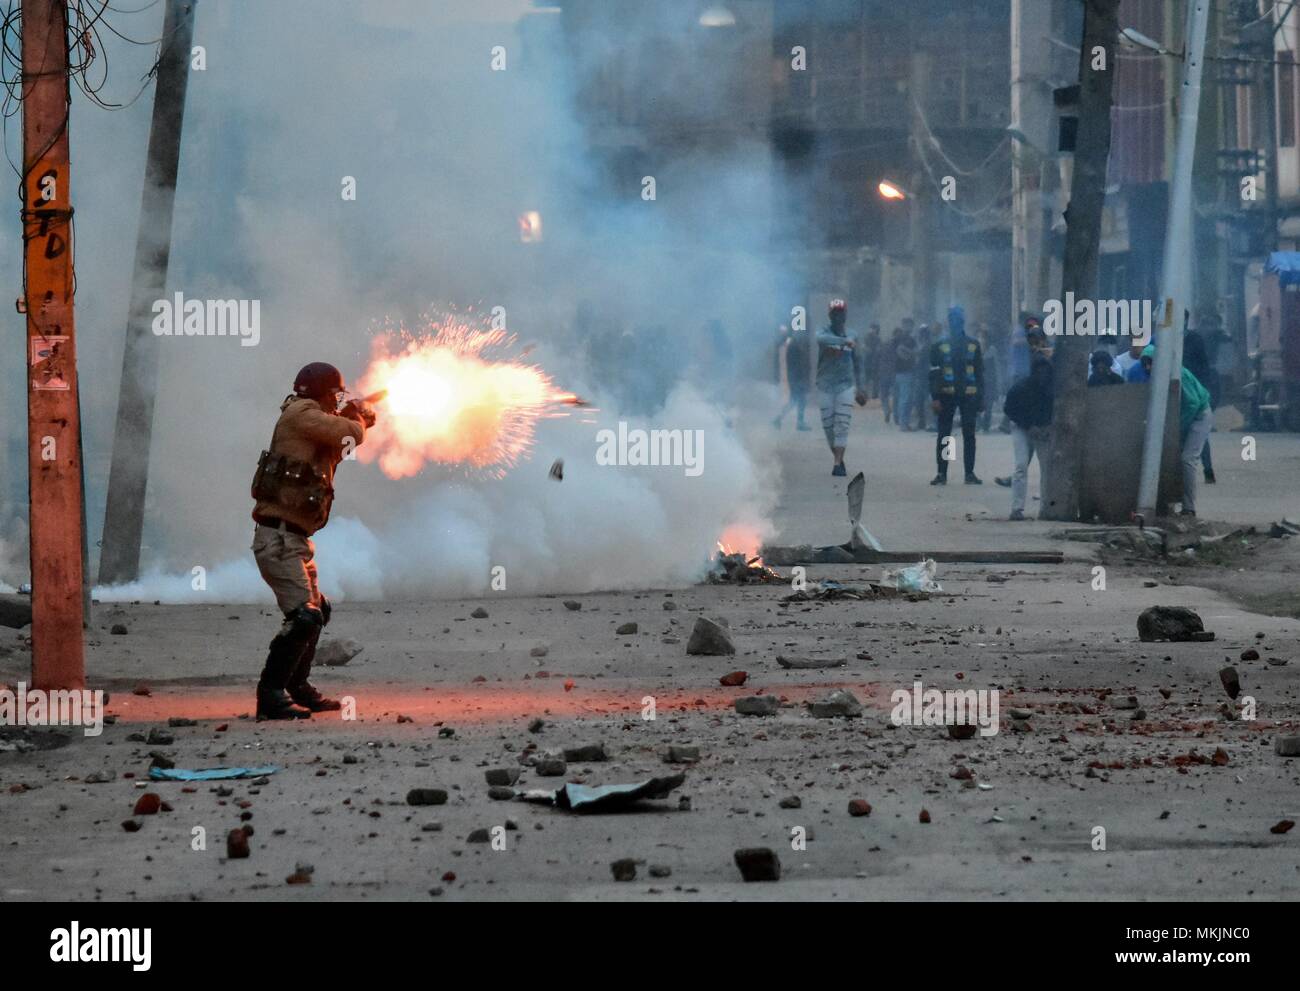 May 8, 2018 - Srinagar, J&K, India - An Indian policeman fire tear gas shell towards Kashmiri protesters during clashes in Srinagar, Indian administered Kashmir. Fierce clashes broke out between government forces and Kashmiri protesters in Srinagar on Tuesday as the valley continued to remain tense over the killing of 11 people including 5 militants and 6 civilians in Indian administered Kashmir. Police used tear smoke shells and shot gun pellets to disperse hundreds of demonstrators who hurled rocks and chanted anti-Indian and pro-freedom slogans. (Credit Image: © Saqib Majeed/SOPA Images via Stock Photo